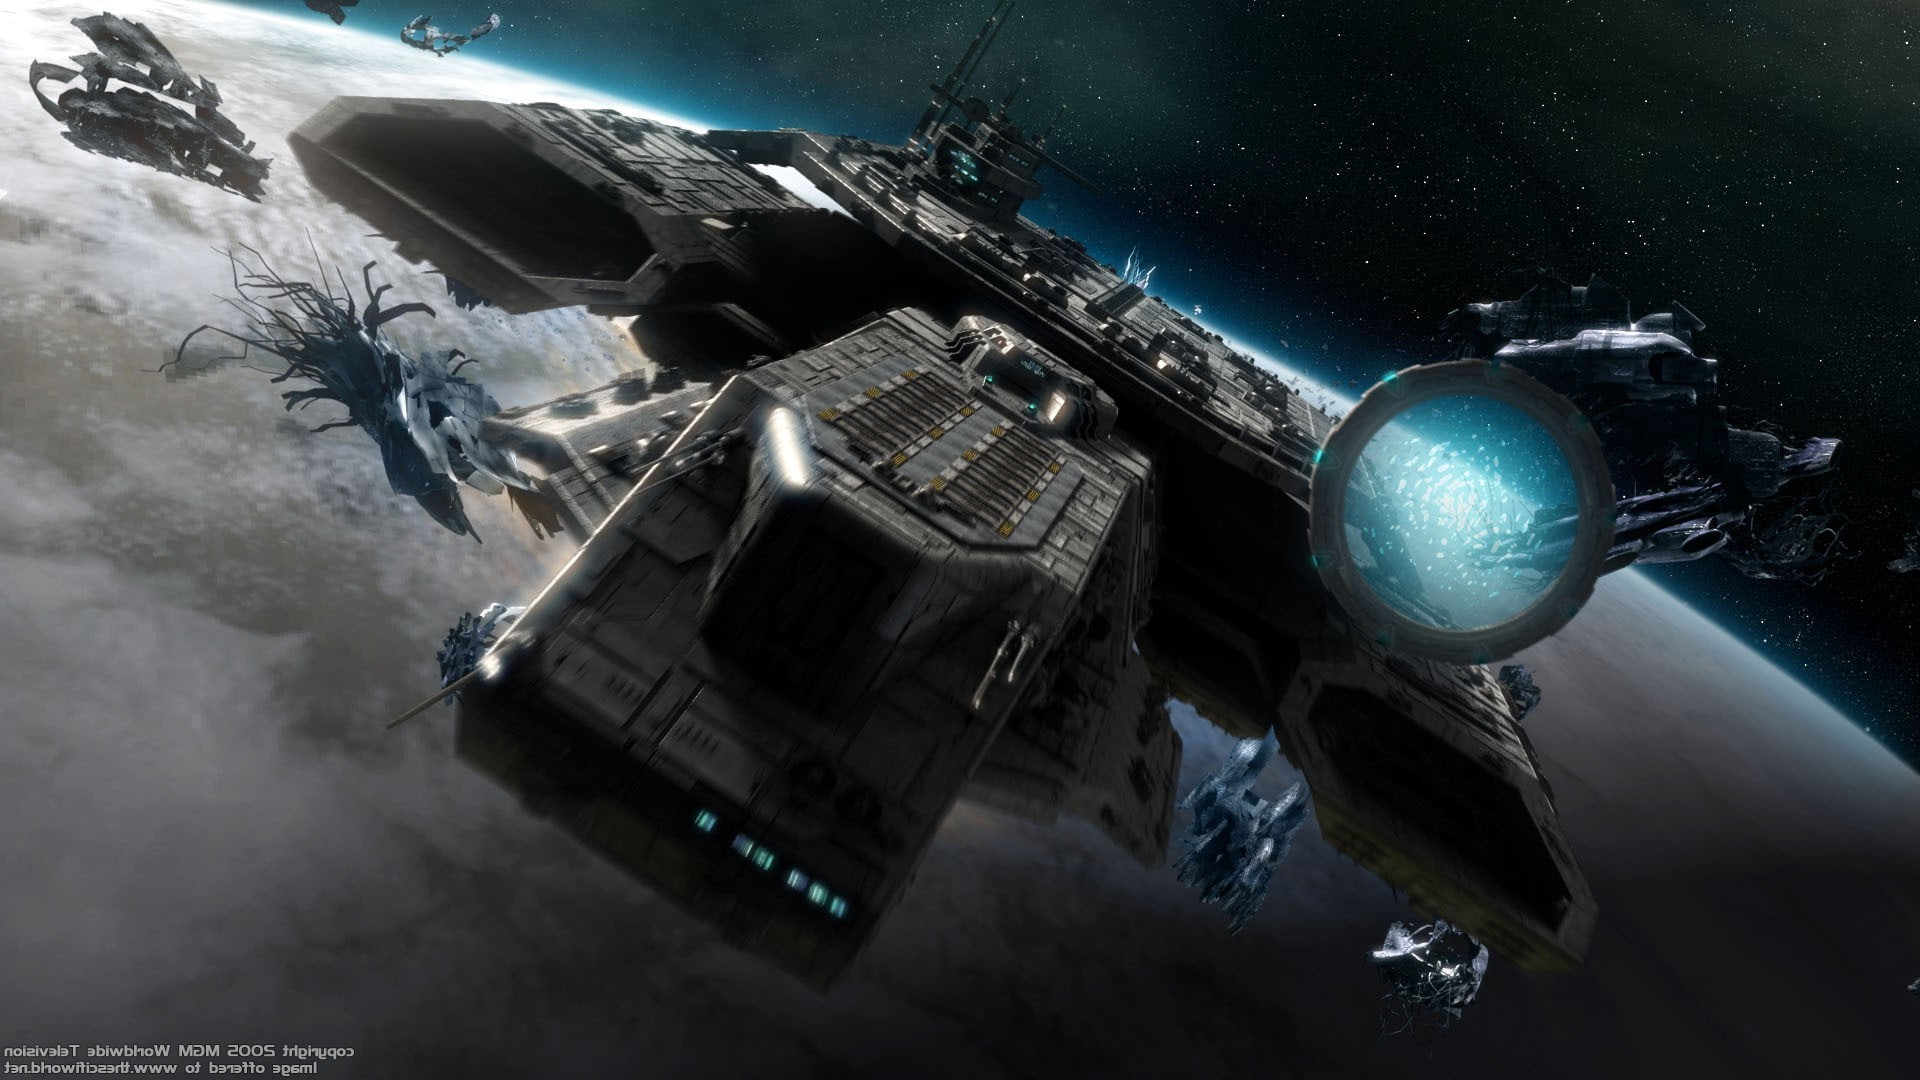 stargate daedalus class space battle space, planet earth, water